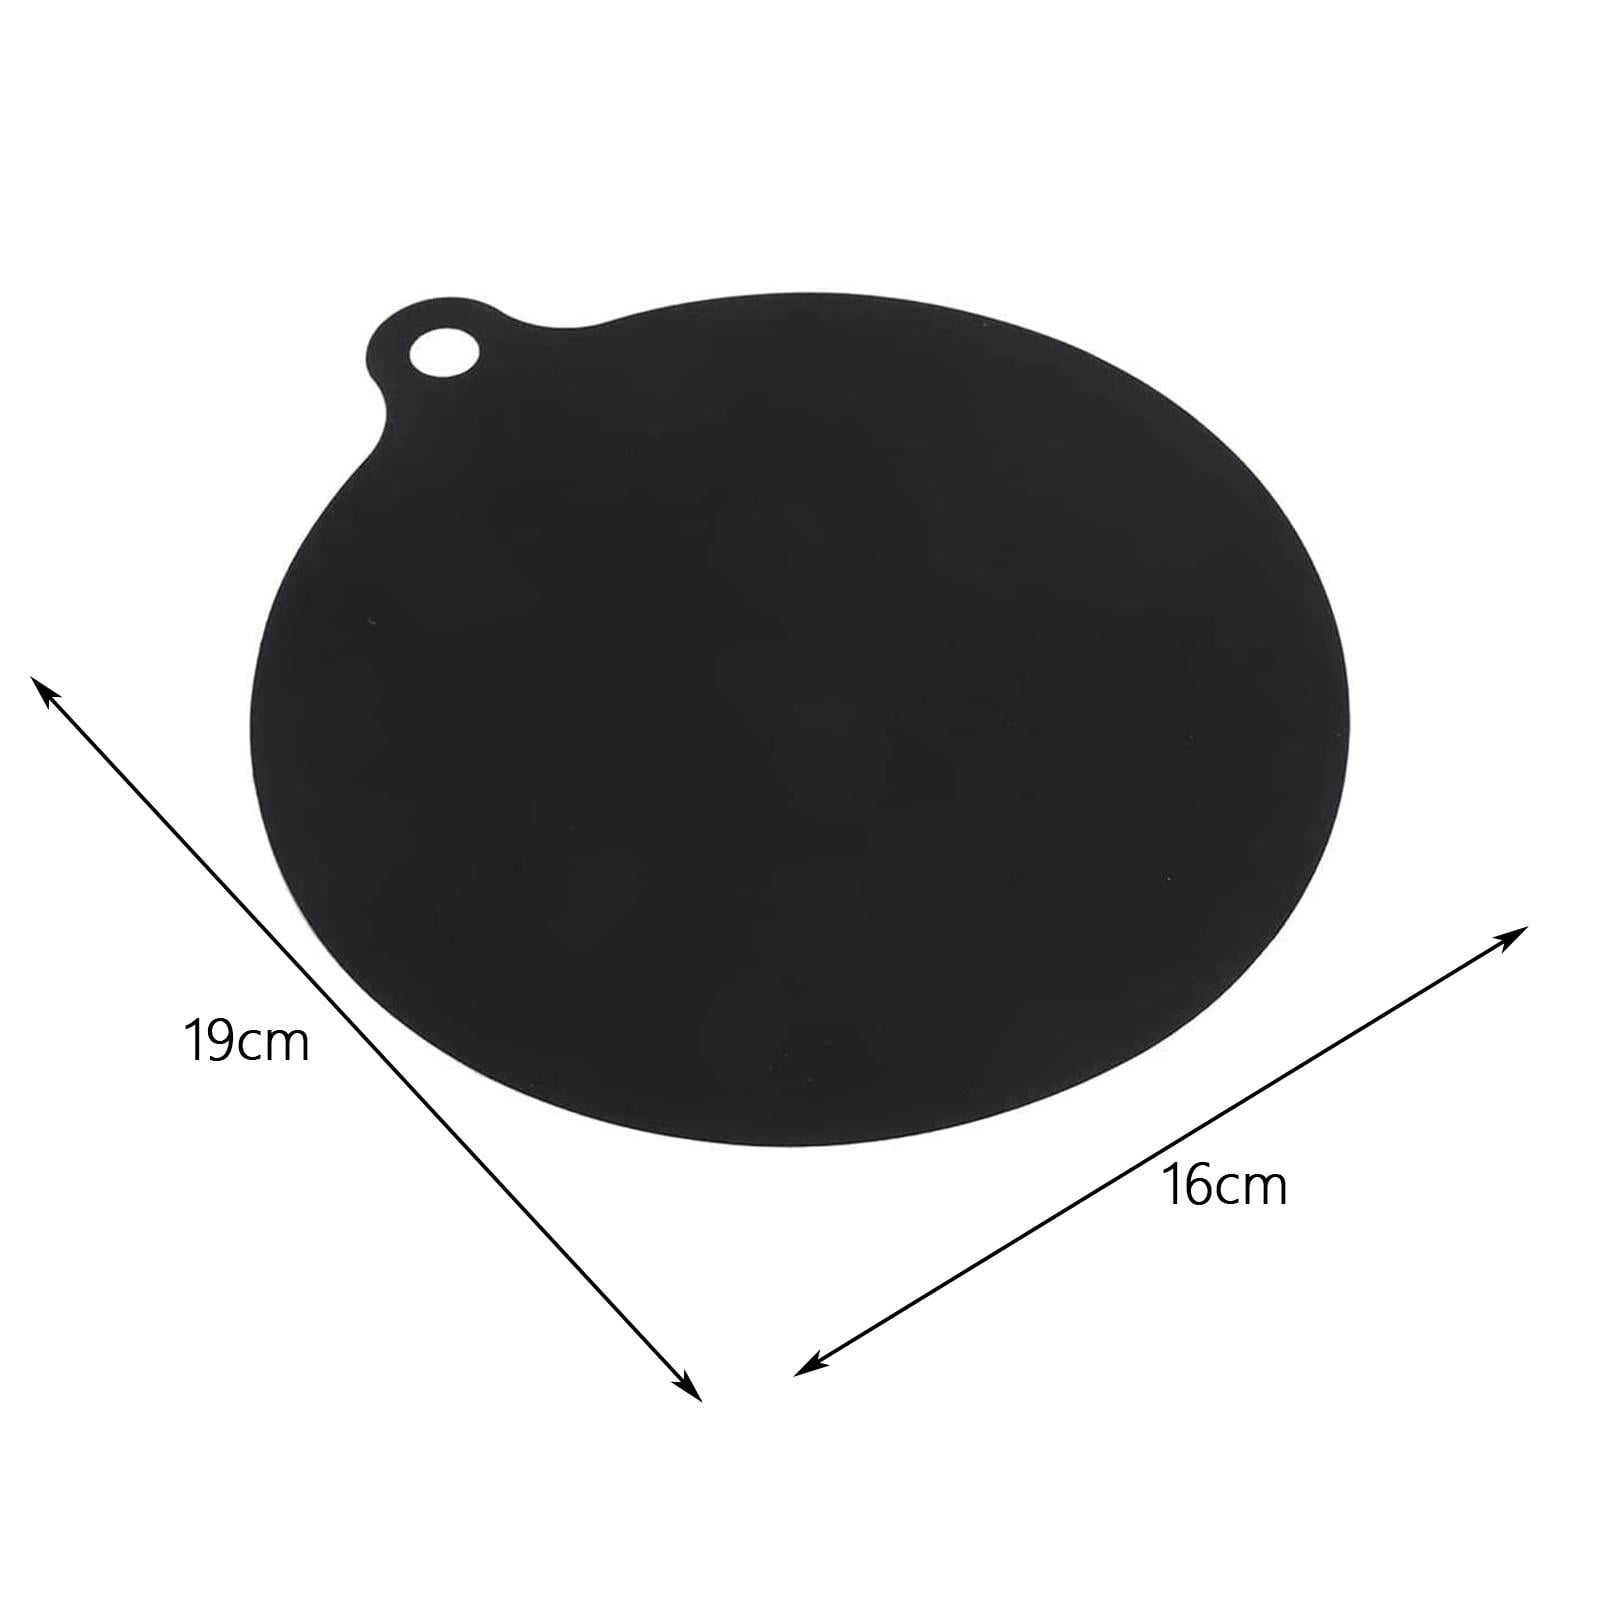 Induction Cooktop Protector Mat While Cooking 2 pcs Non Slip Pad Guard from  Pollution Induction Cooker Protection Mat 10inches Flower Shape Grey Color